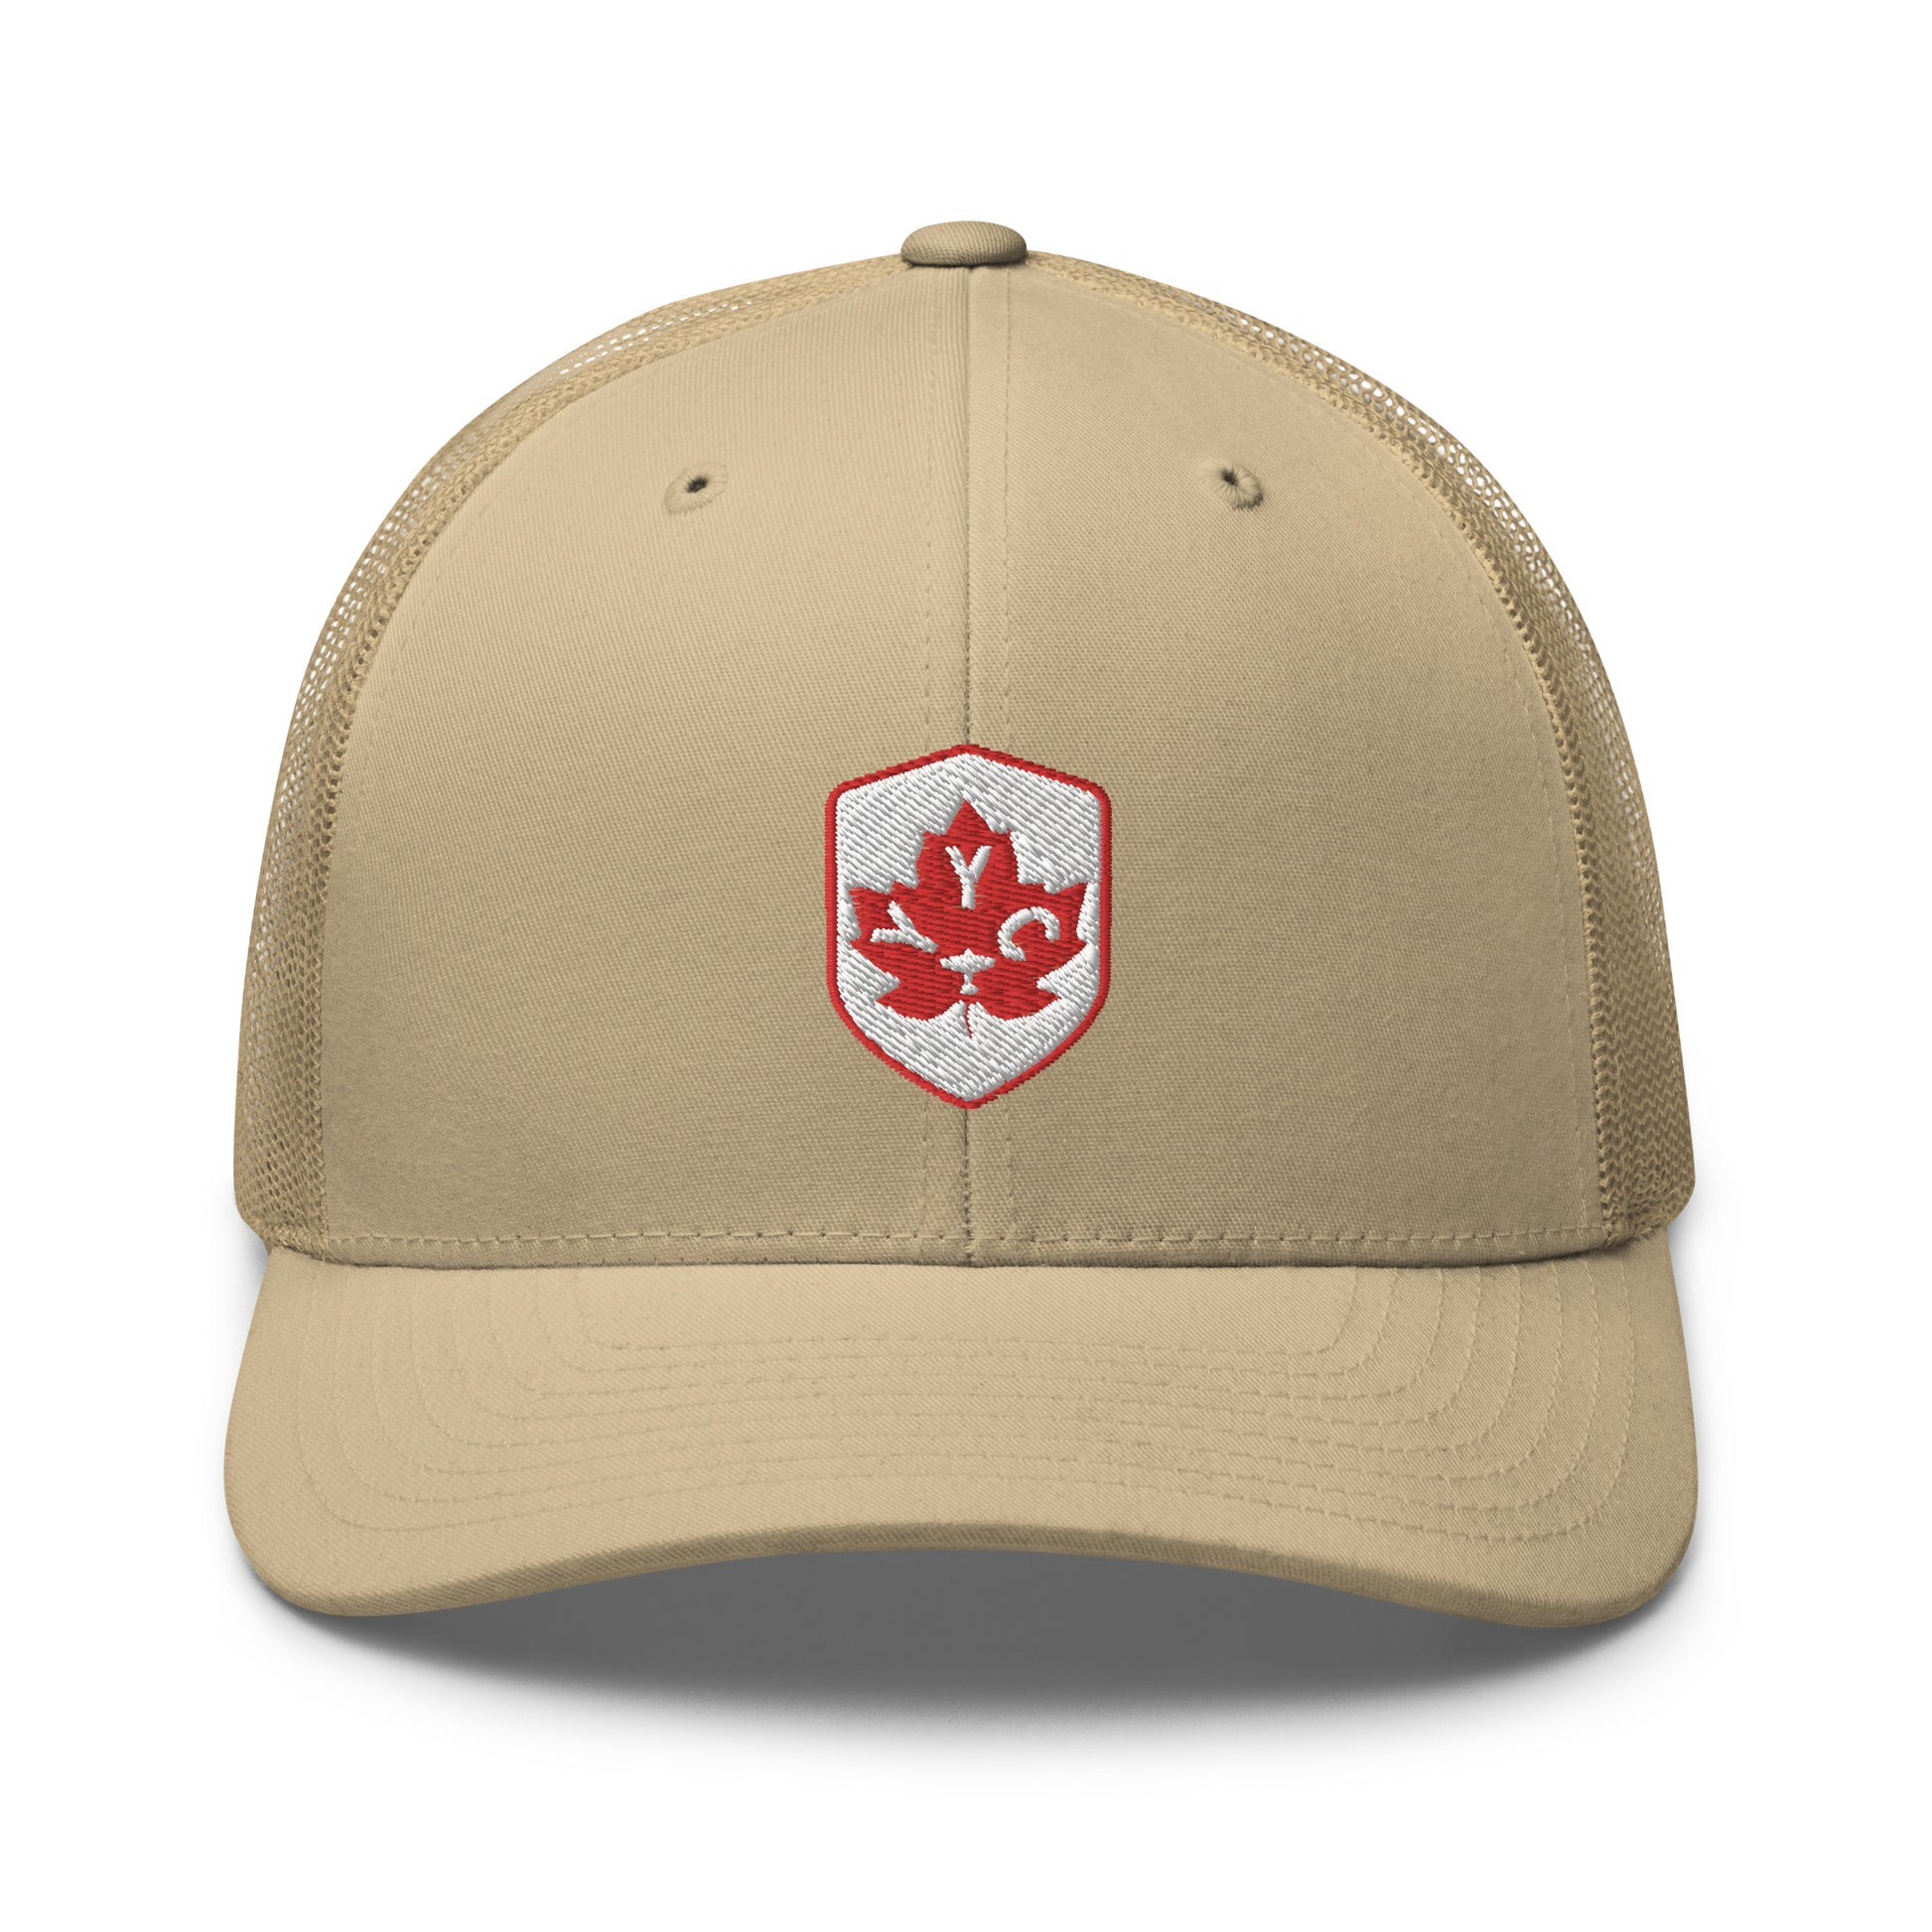 Maple Leaf Trucker Hat - Red/White • YYC Calgary • YHM Designs - Image 26